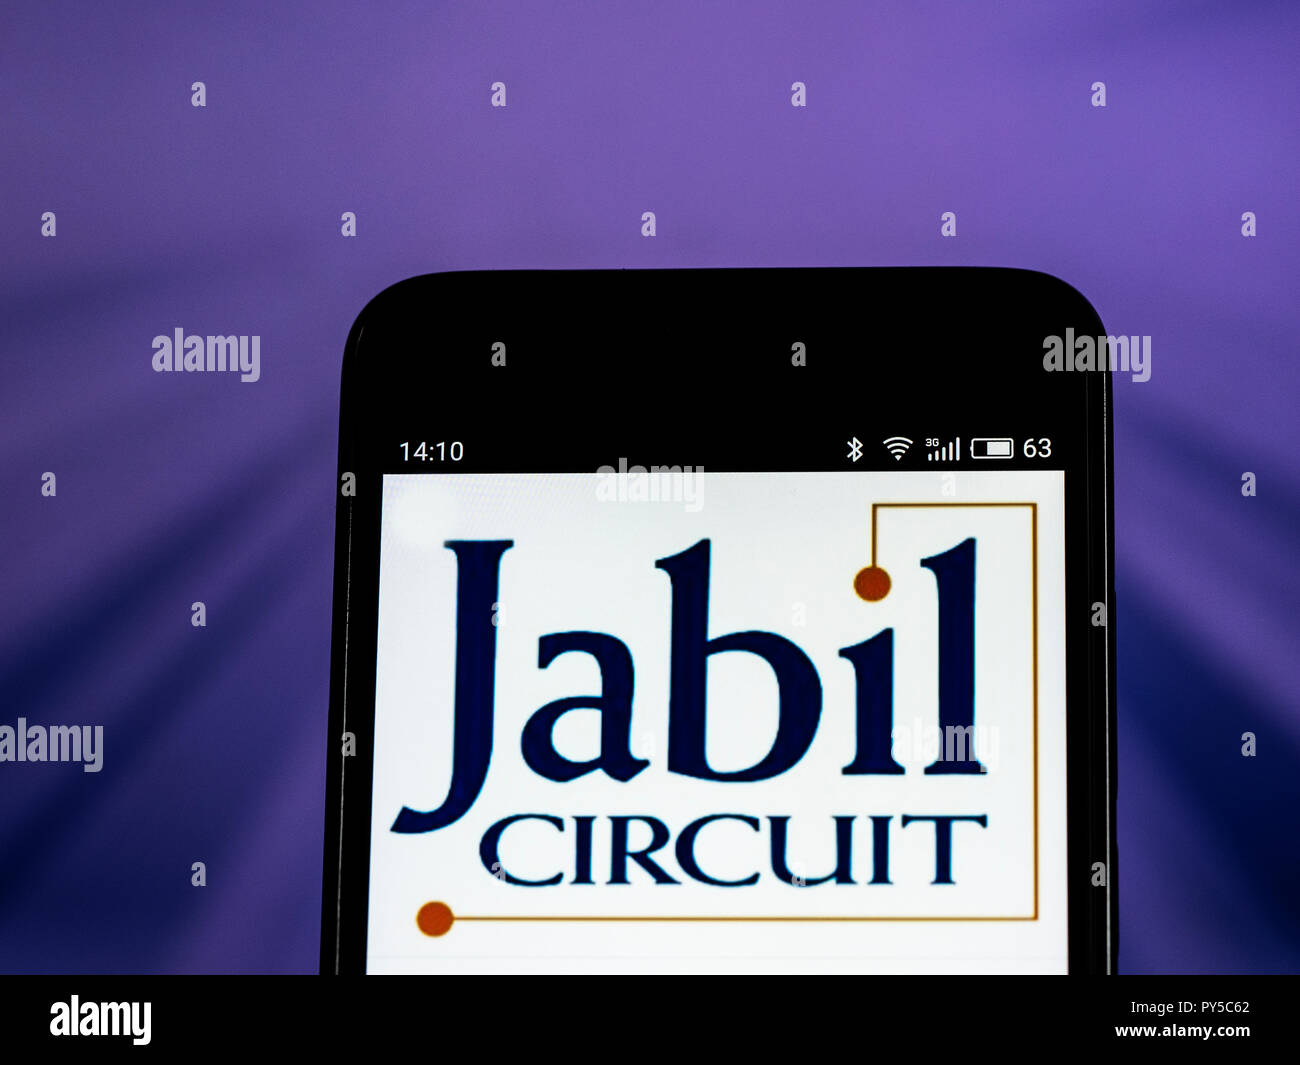 Jabil Company logo seen displayed on smart phone. Jabil Inc. is a United States-based global manufacturing services company. Jabil has 90 facilities in 23 countries, and 175,000 employees worldwide. Stock Photo